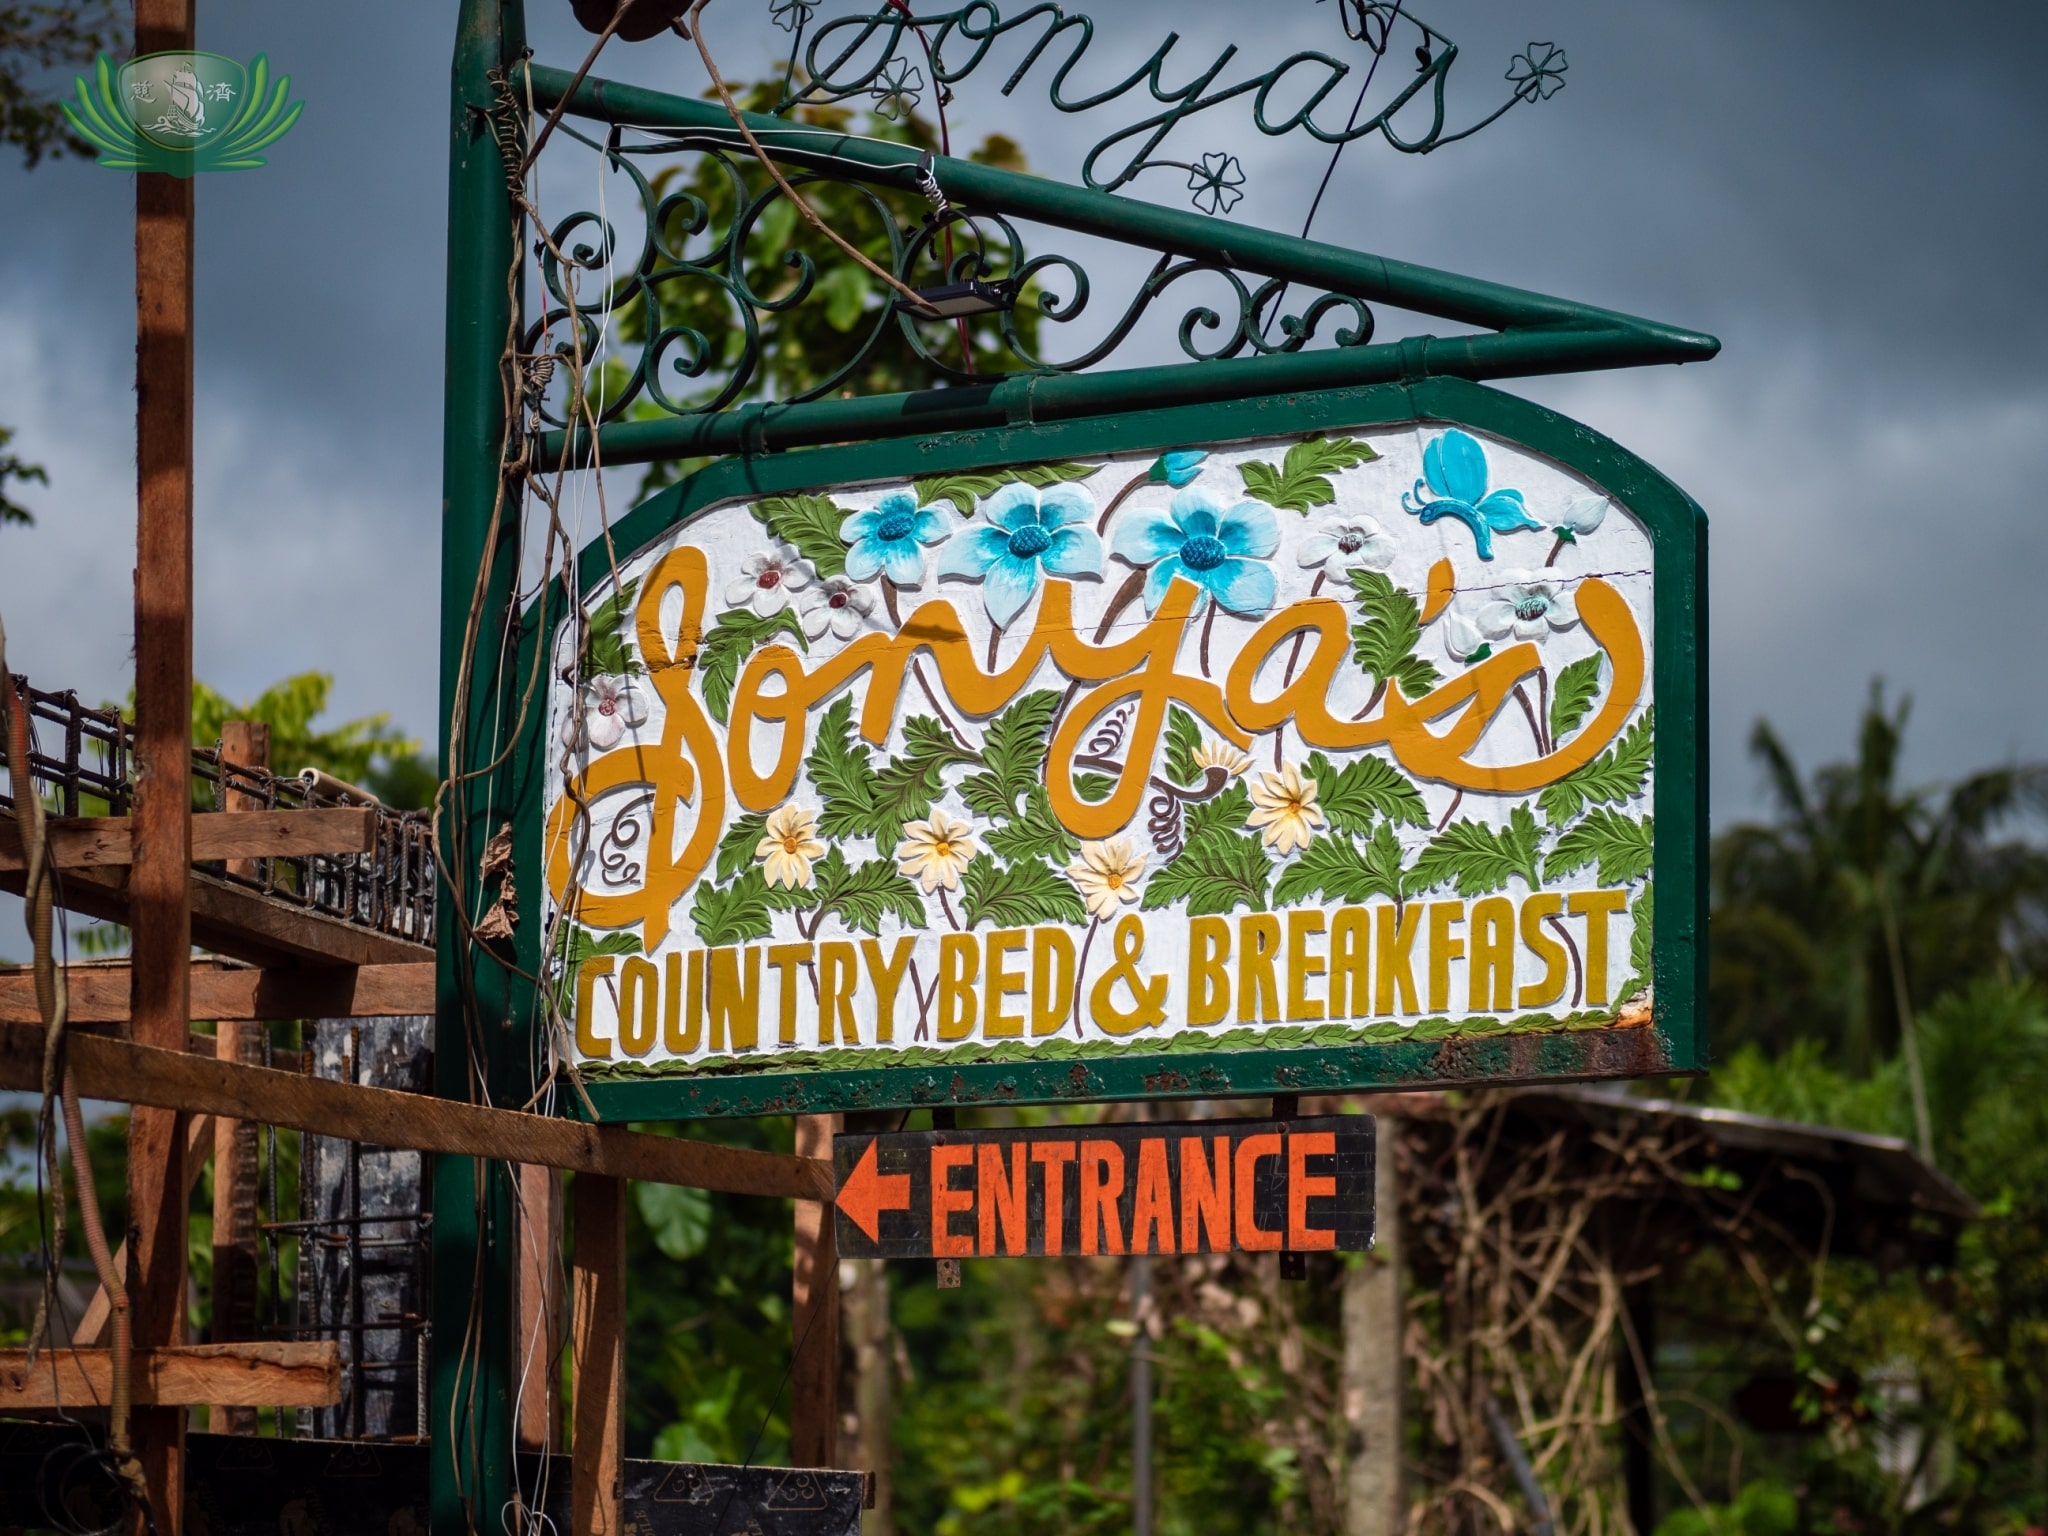 Entrance sign welcoming guests to Sonya's Garden.【Photo by Daniel Lazar】